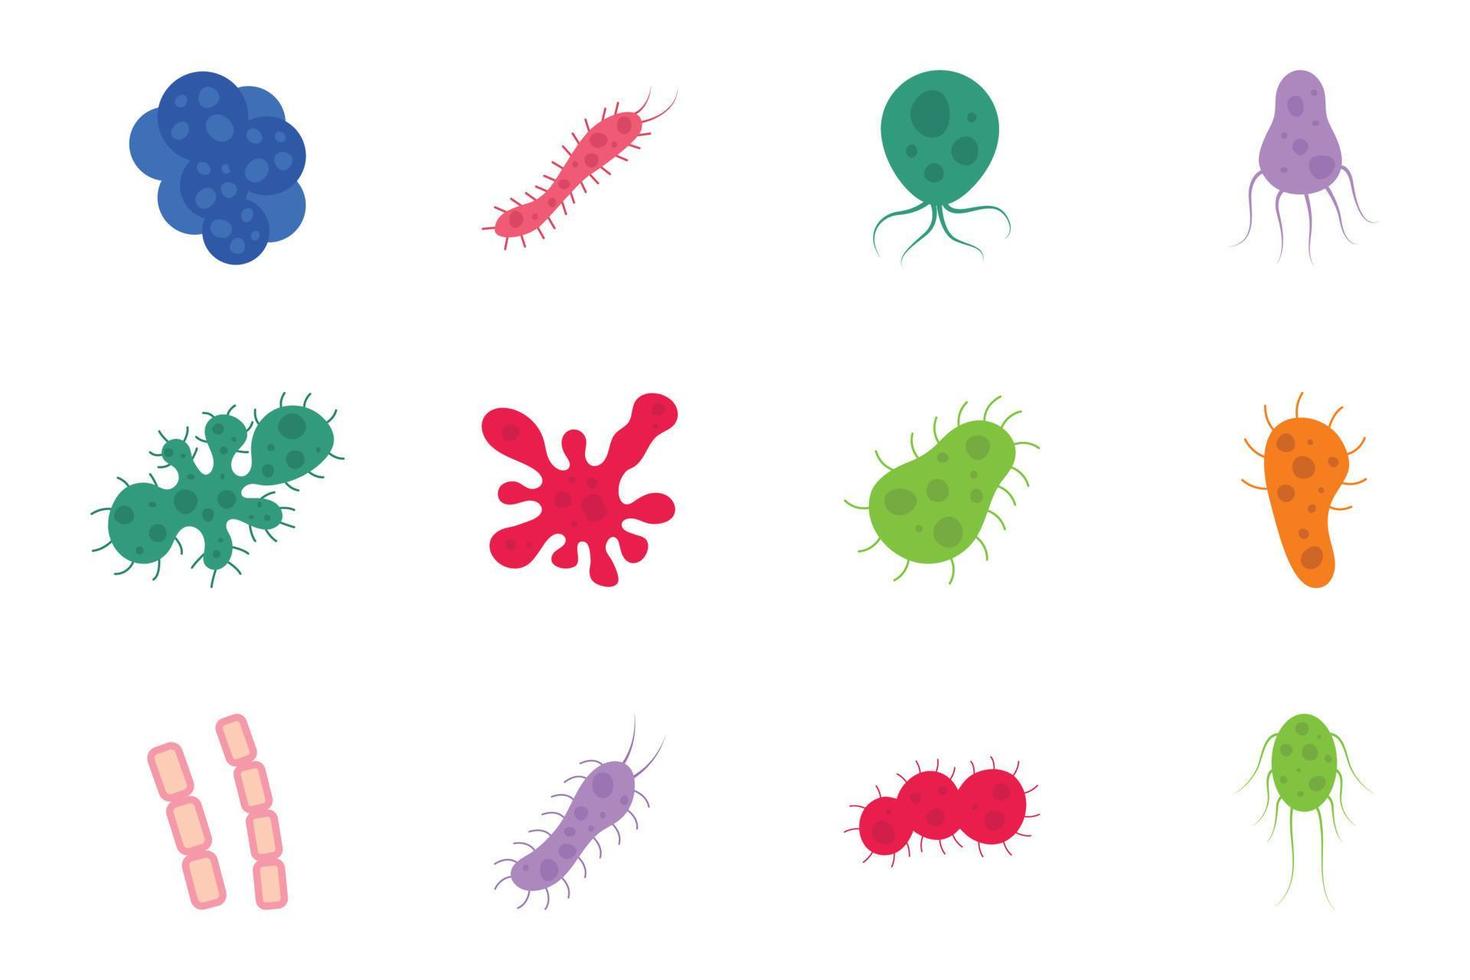 set of bacteria and virus vector illustration in flat style. Disease-causing bacterias, viruses and microbes.